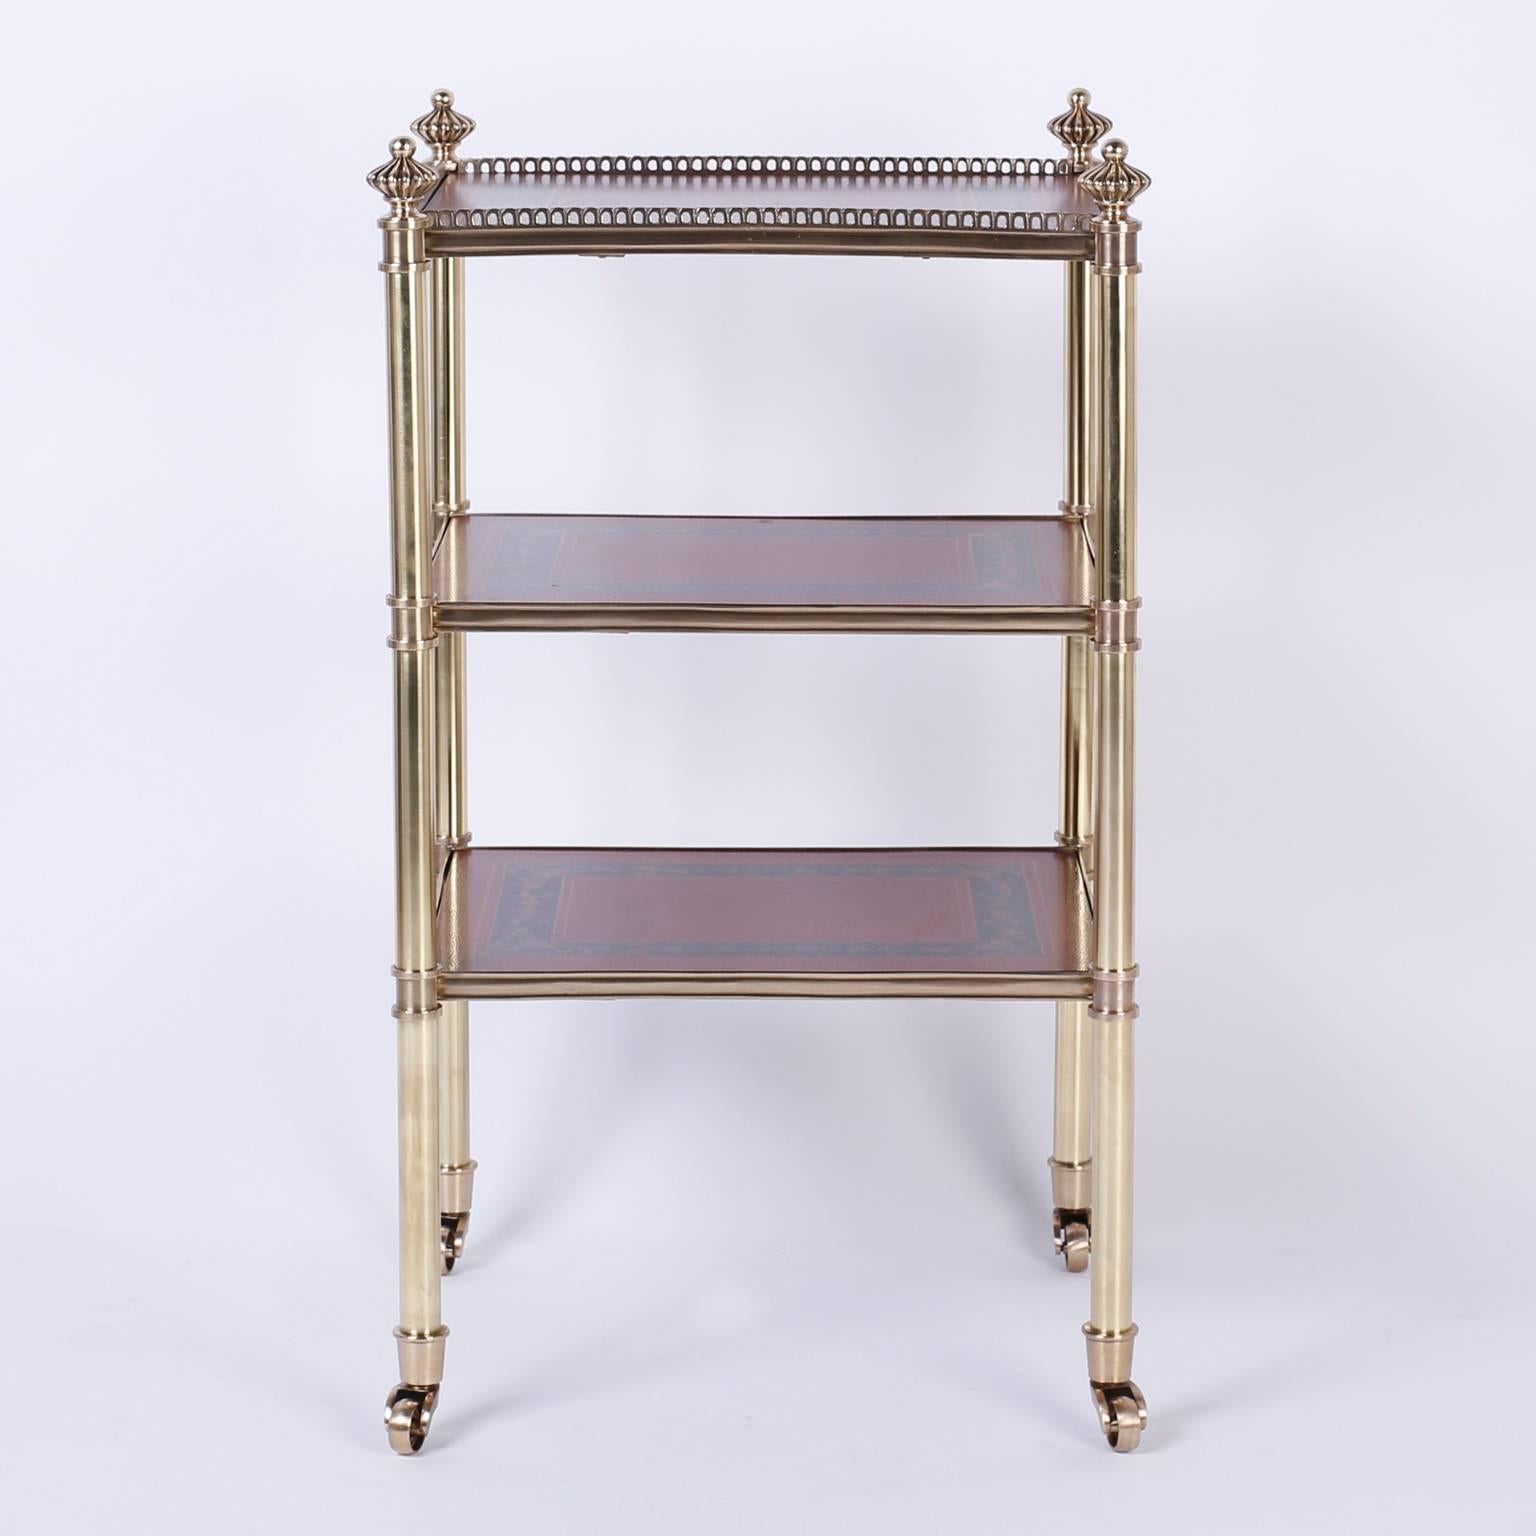 Three-tiered serving or display stand with a dashing polished and lacquered brass frame topped, stylized finials and rolling on brass casters. The three shelves are decorated with tooled and painted red leather, in a classic design.